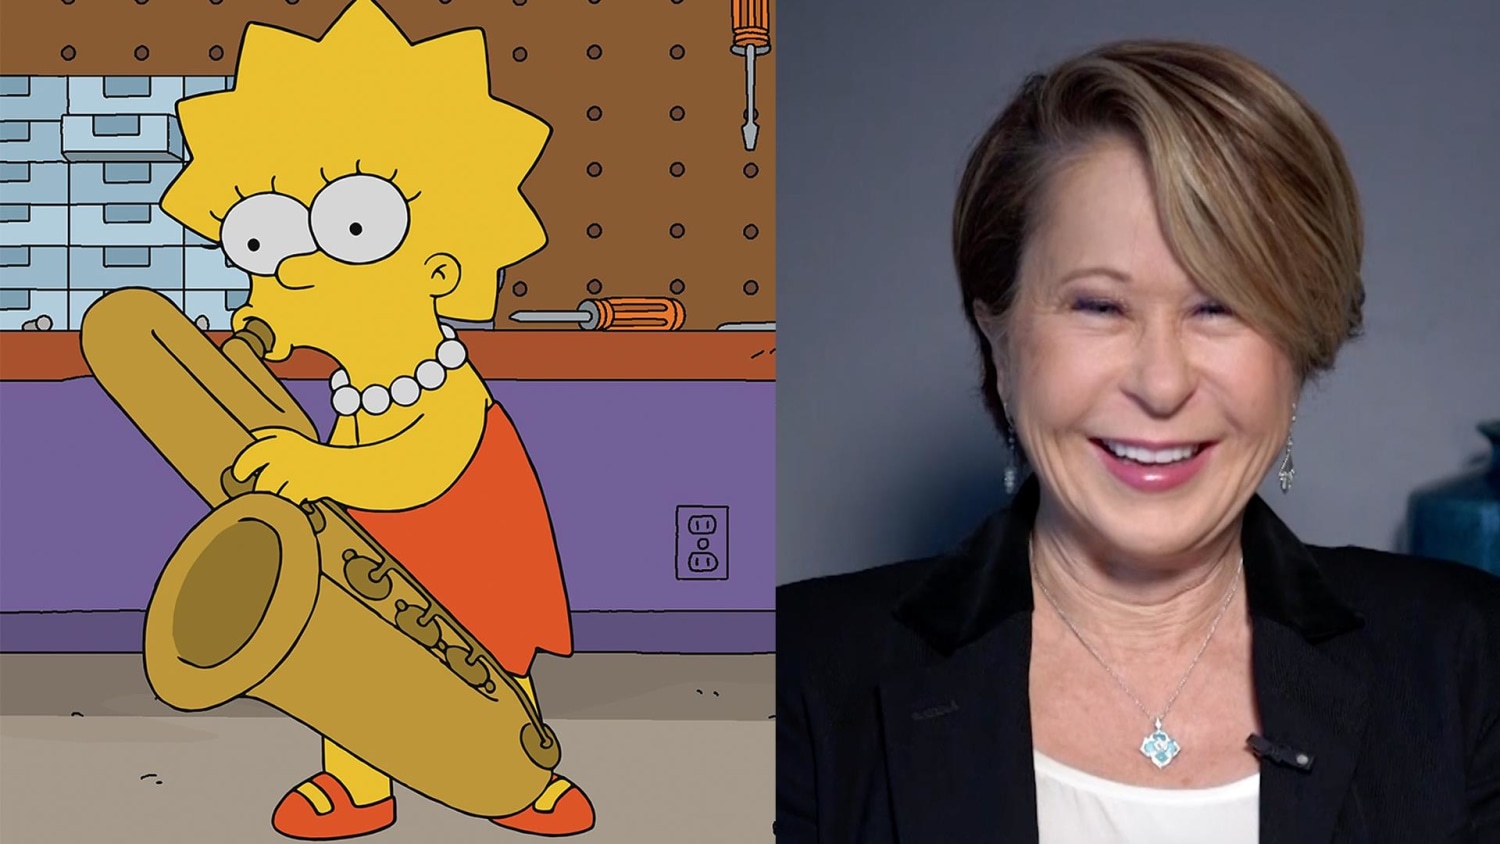 Simpsons' 30th anniversary: Nancy Cartwright reflects on Bart's